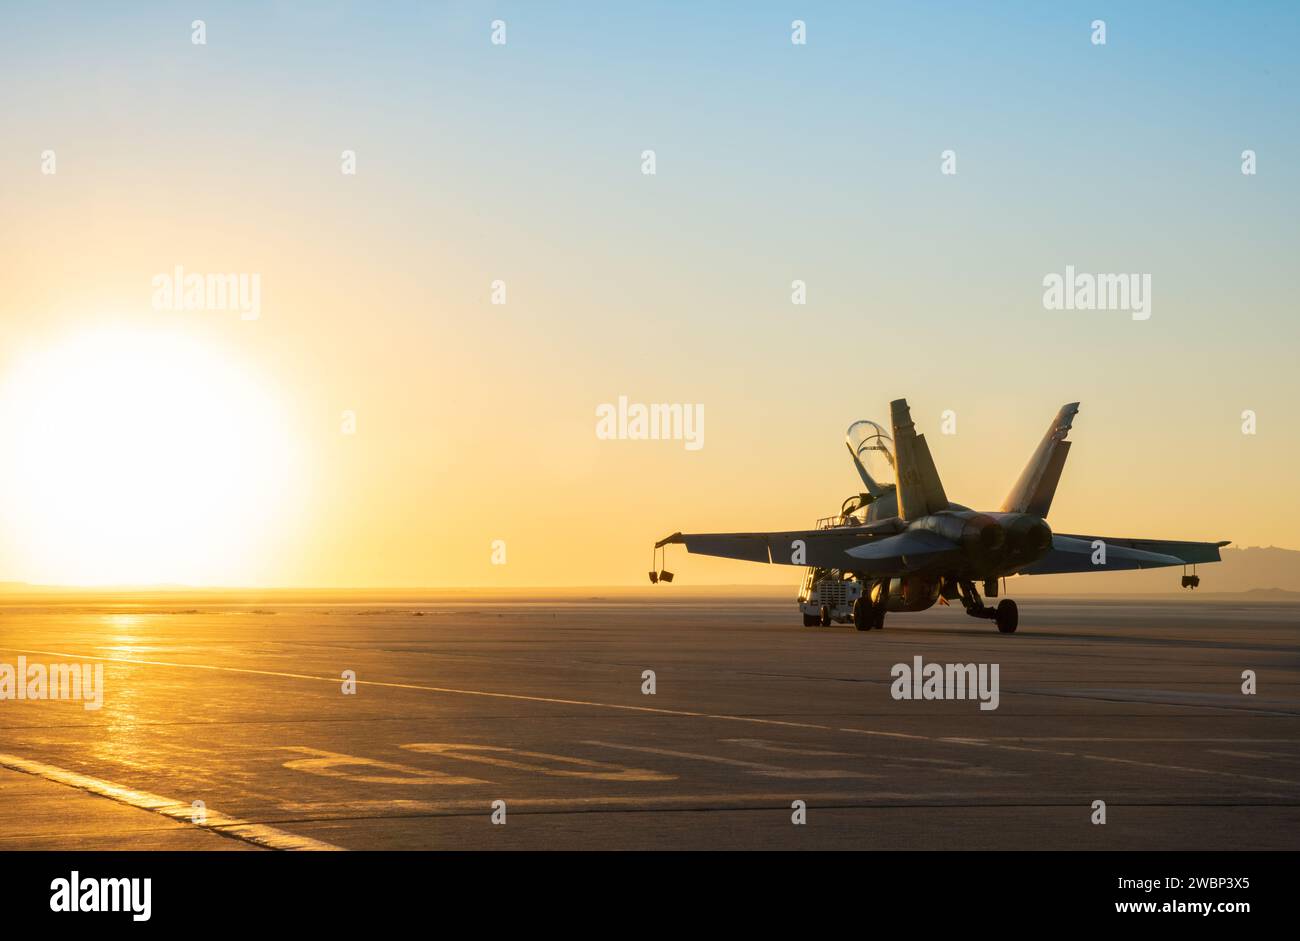 A NASA F/A-18 is towed to the apron at NASA’s Armstrong Flight Research Center in Edwards, California during sunrise over Rogers Dry Lake. The F/A-18 was used to test a transmitter for an air navigation system, called the Airborne Location Integrating Geospatial Navigation System, or ALIGNS. This system, designed to allow pilots to position their aircraft at precise distances to each other, will be critical for acoustic validation efforts of NASA’s next supersonic X-plane, the X-59 Quiet SuperSonic Technology. Stock Photo